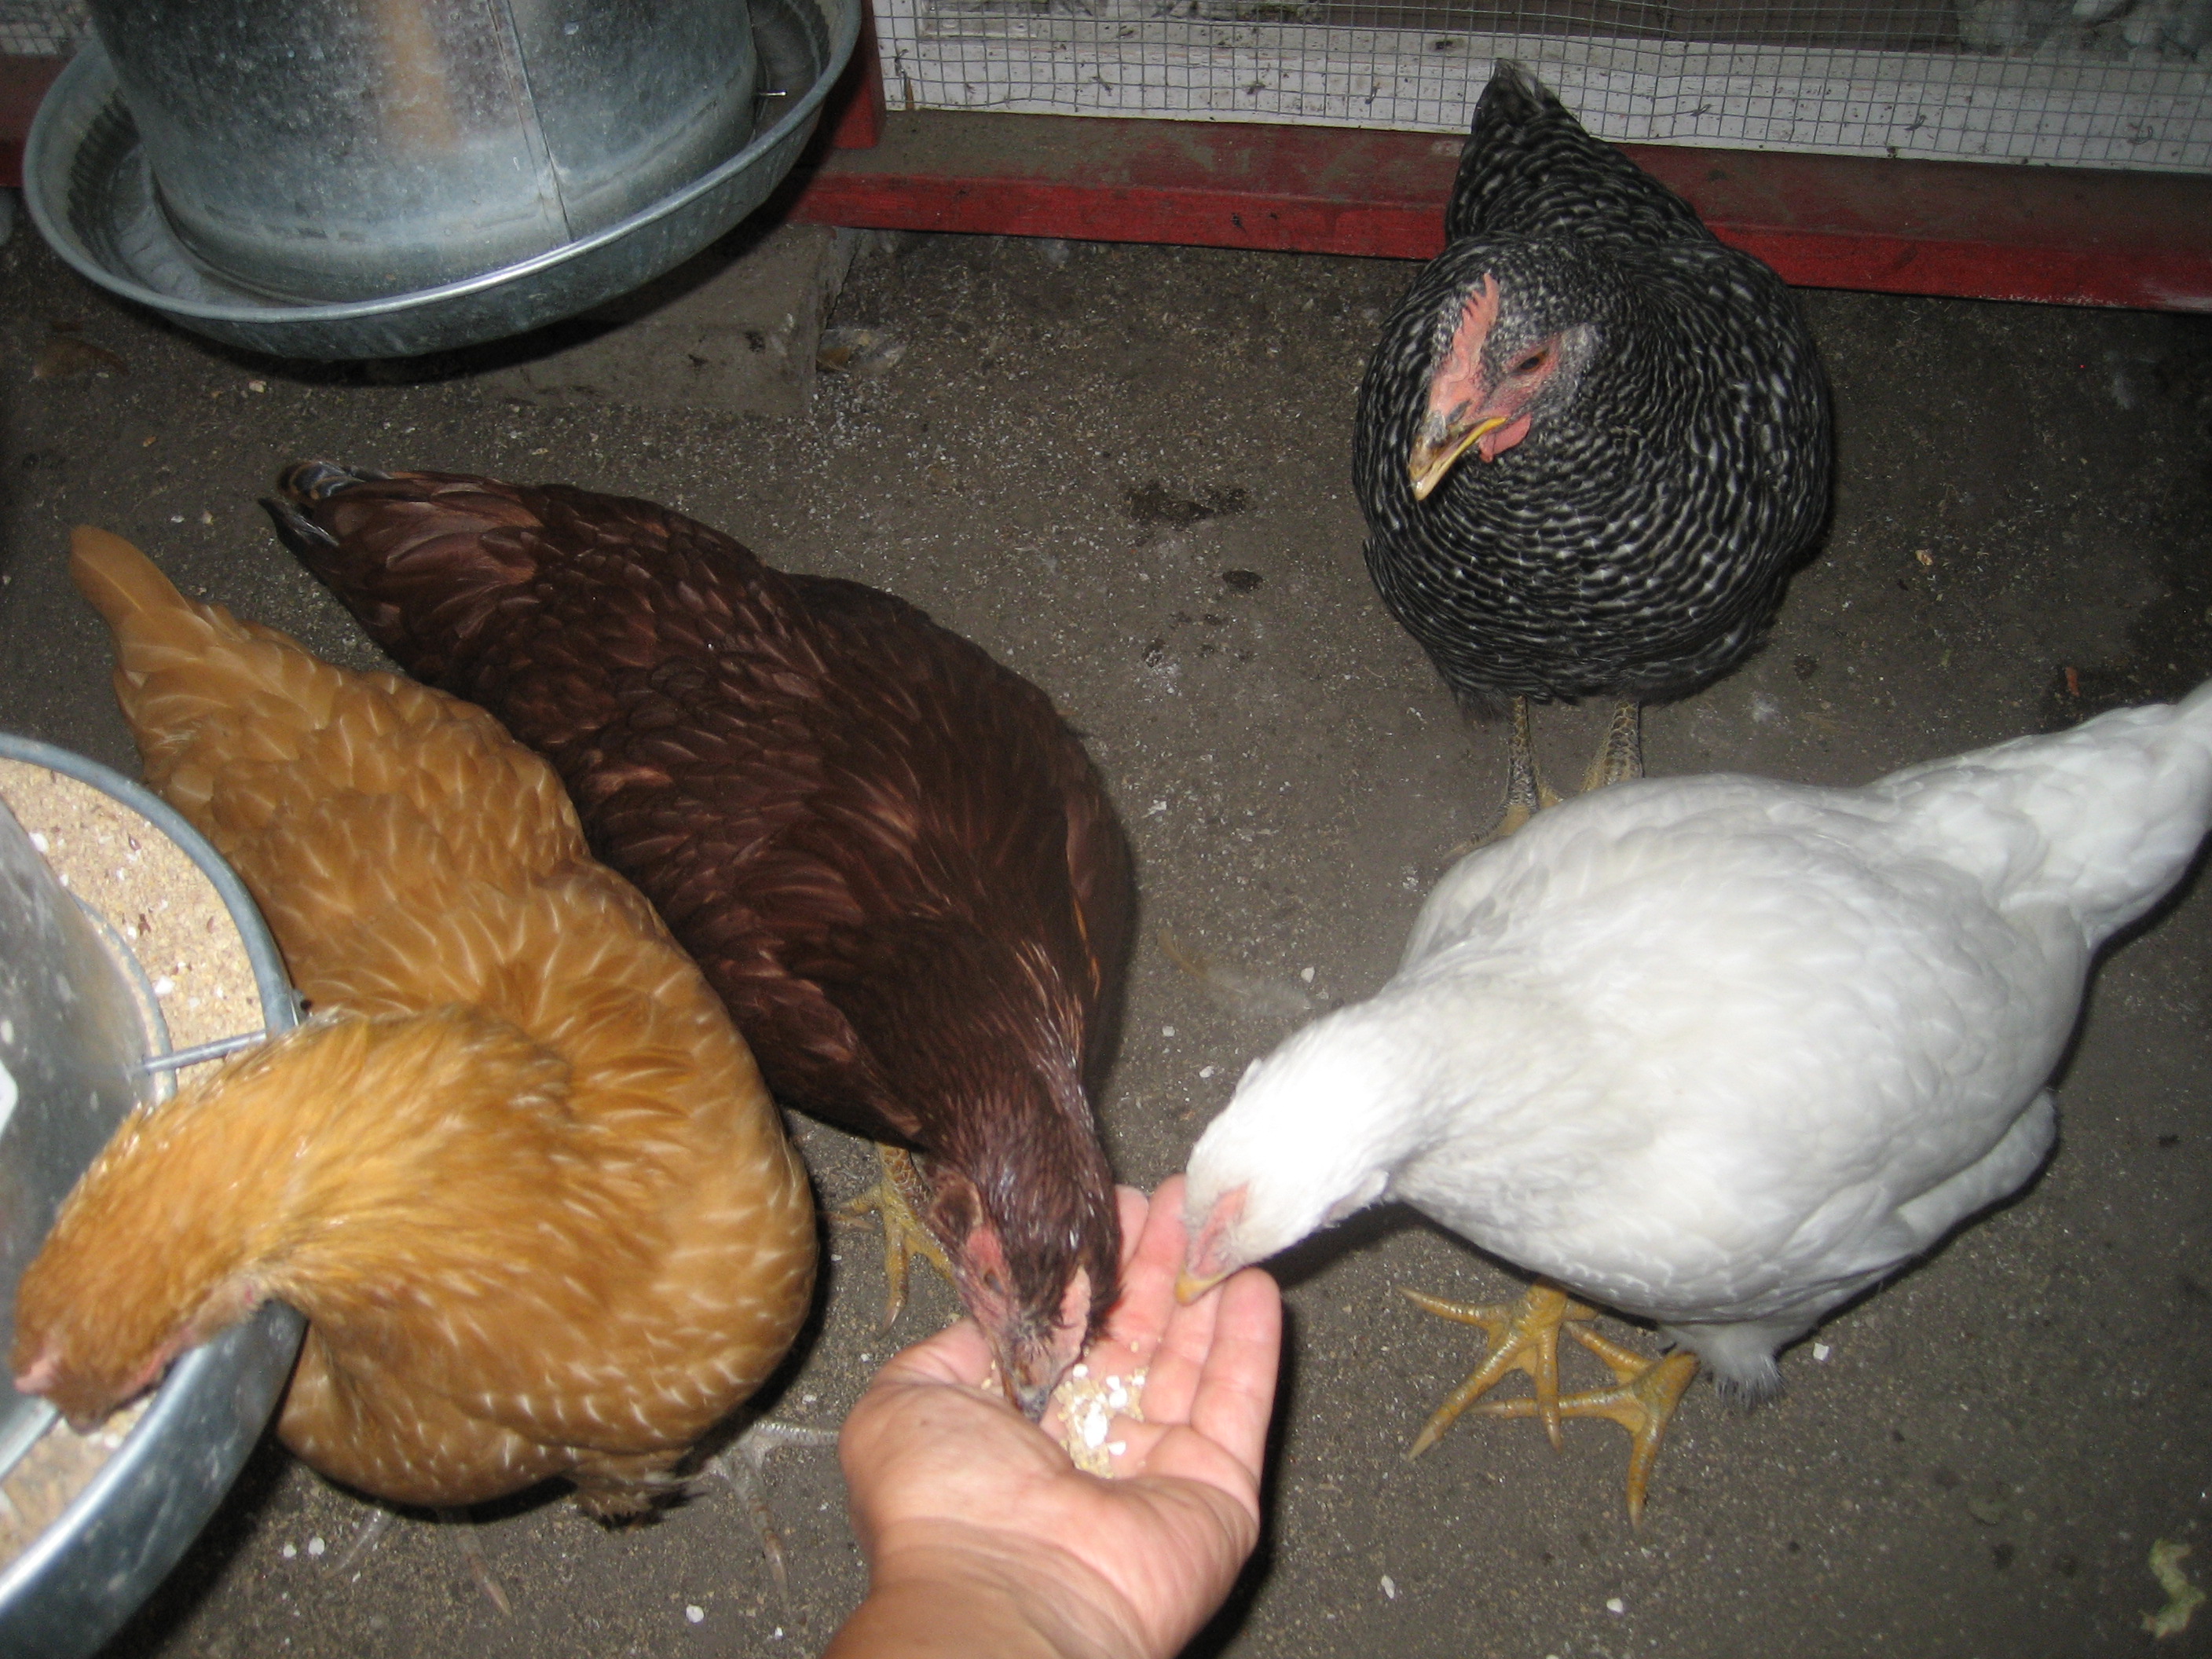 They like to eat feed from my hand